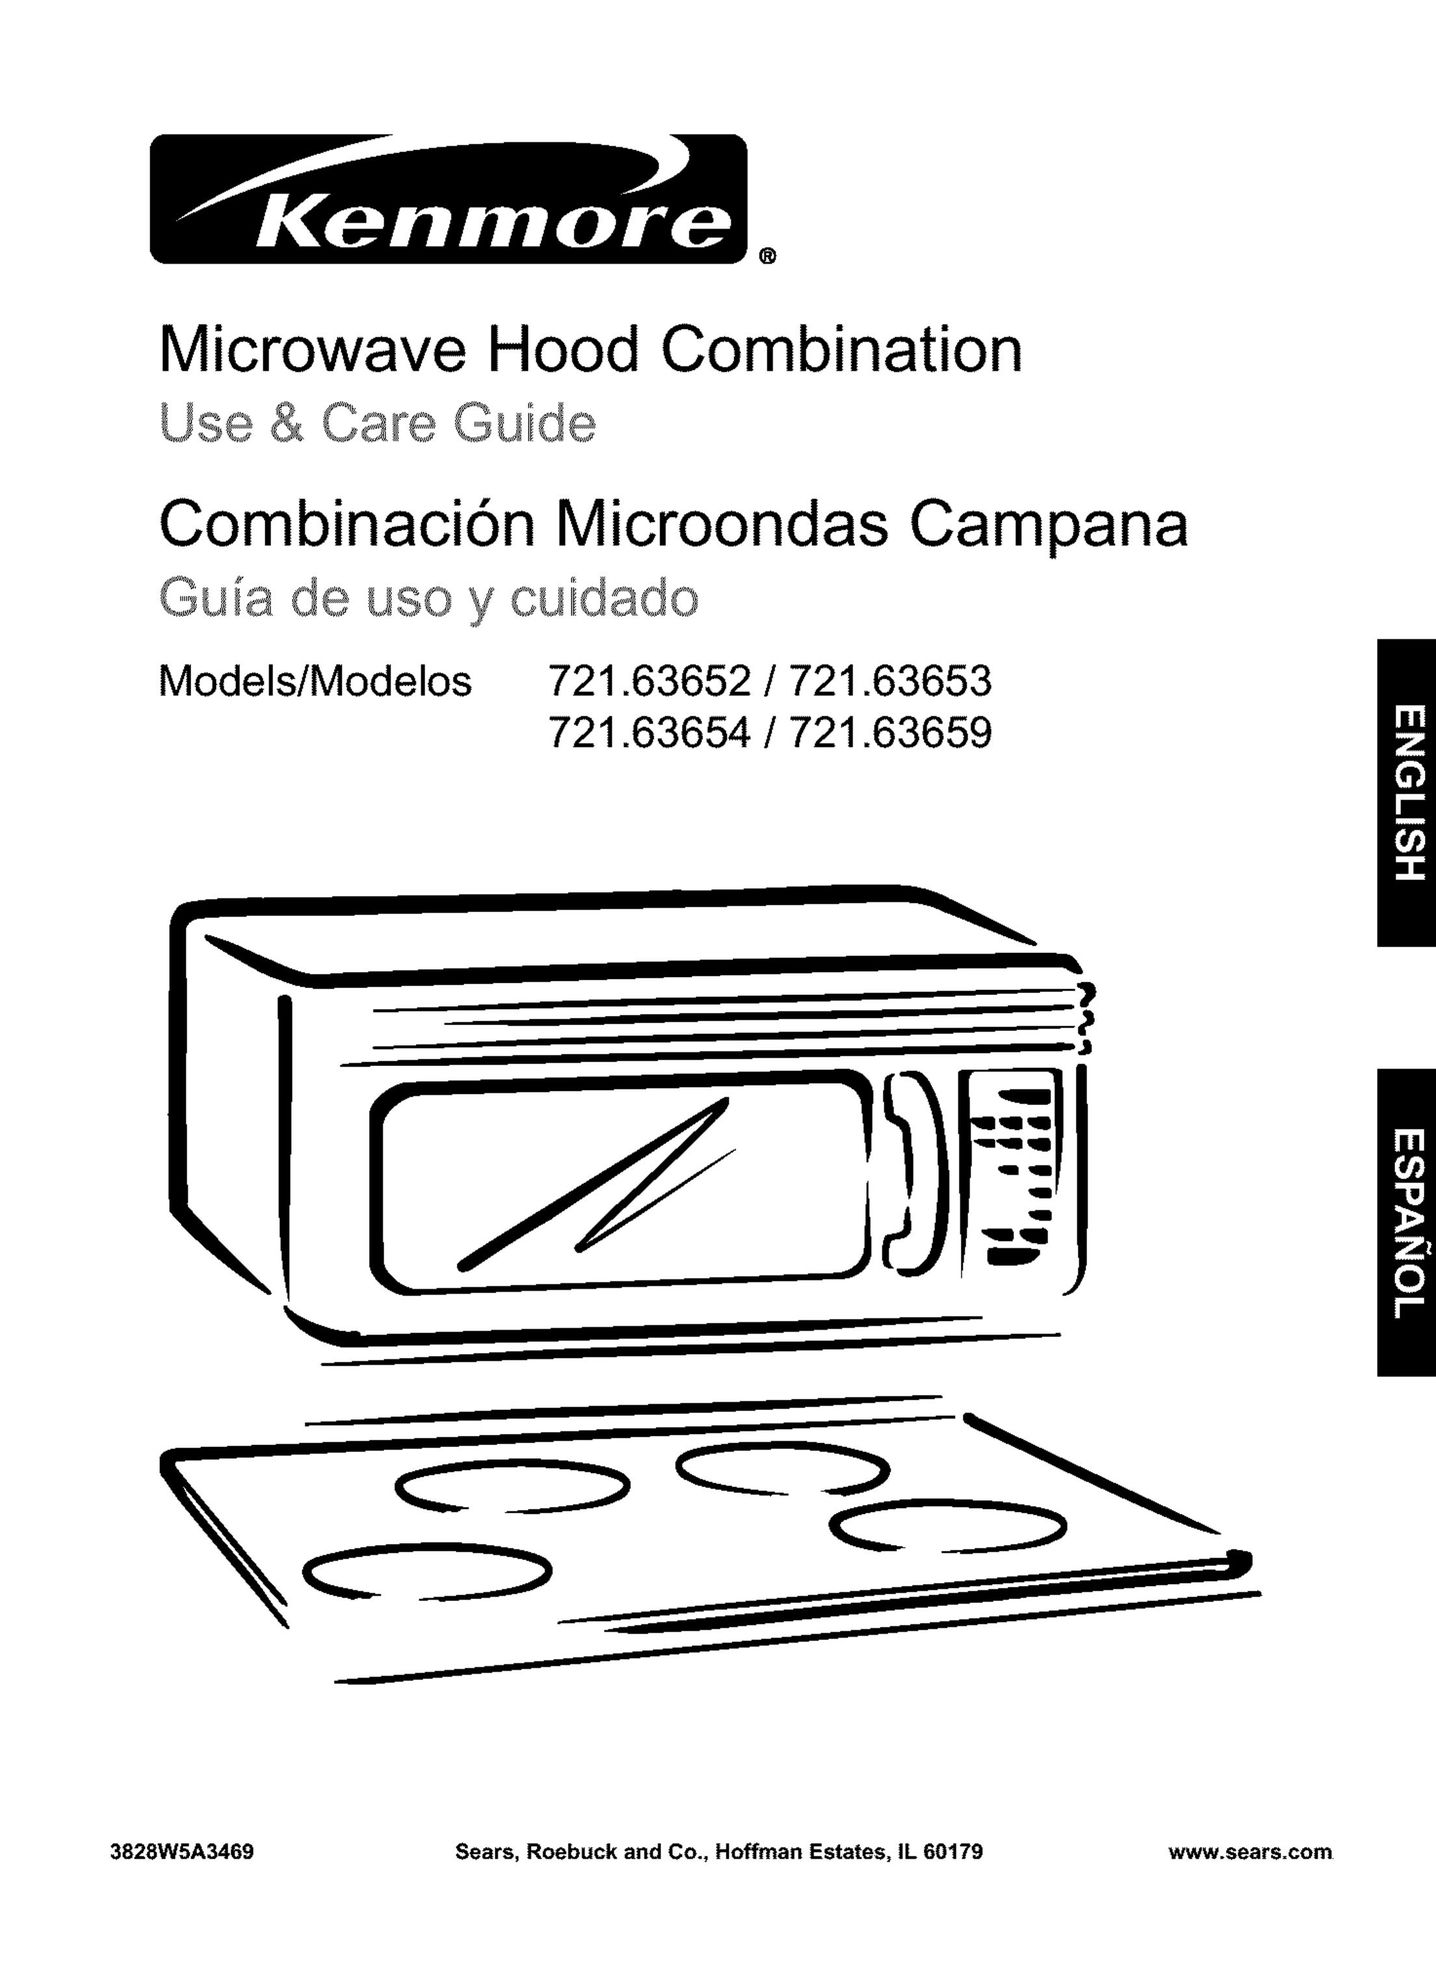 Kenmore 721.63659 Microwave Oven User Manual